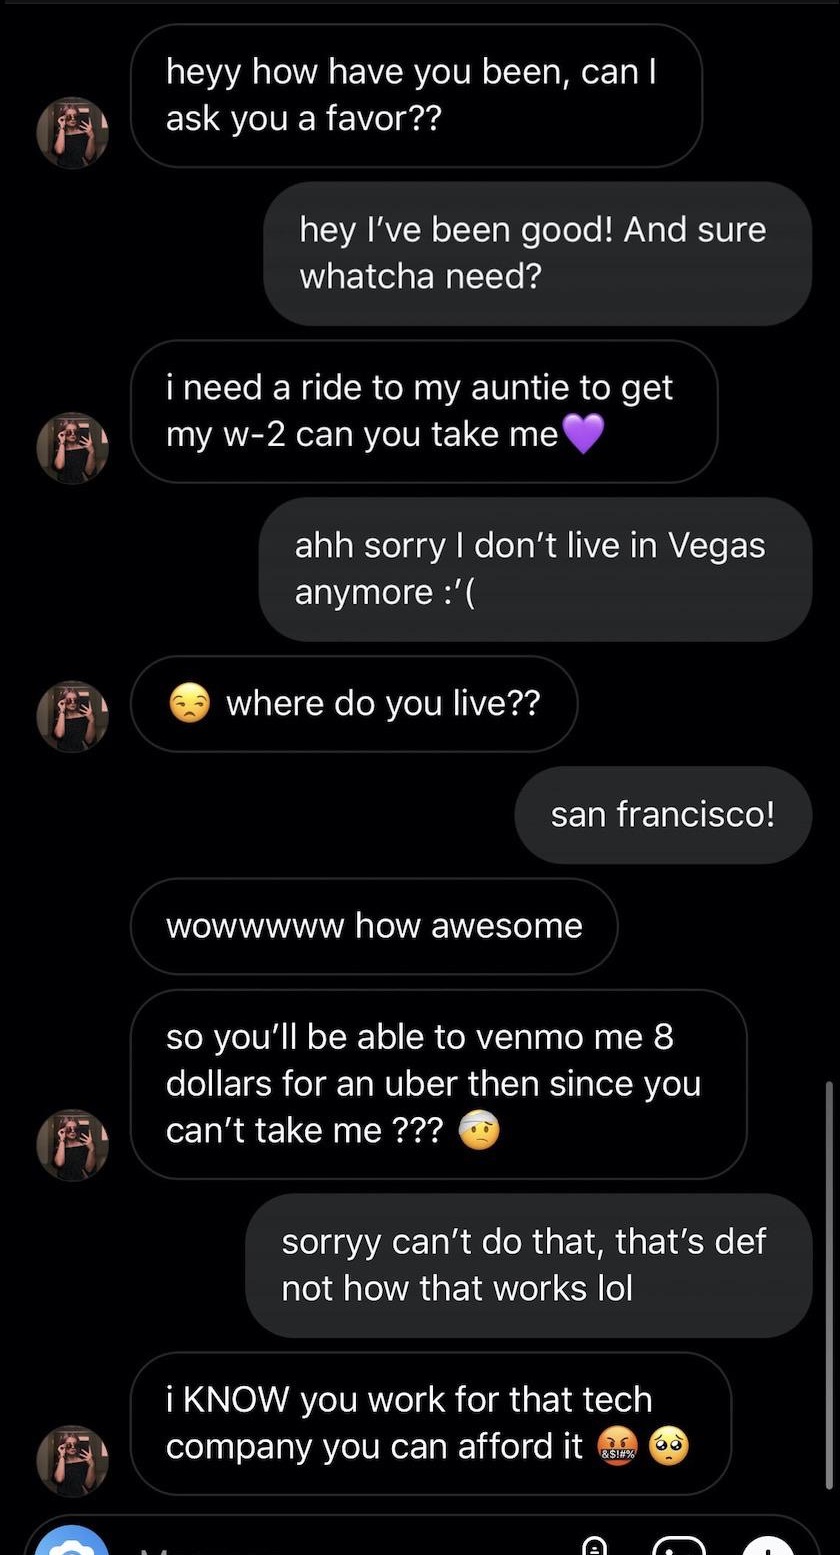 screenshot - heyy how have you been, can! ask you a favor?? hey I've been good! And sure whatcha need? i need a ride to my auntie to get my w2 can you take me ahh sorry I don't live in Vegas anymore ' where do you live?? san francisco! Wowwww w awesome so